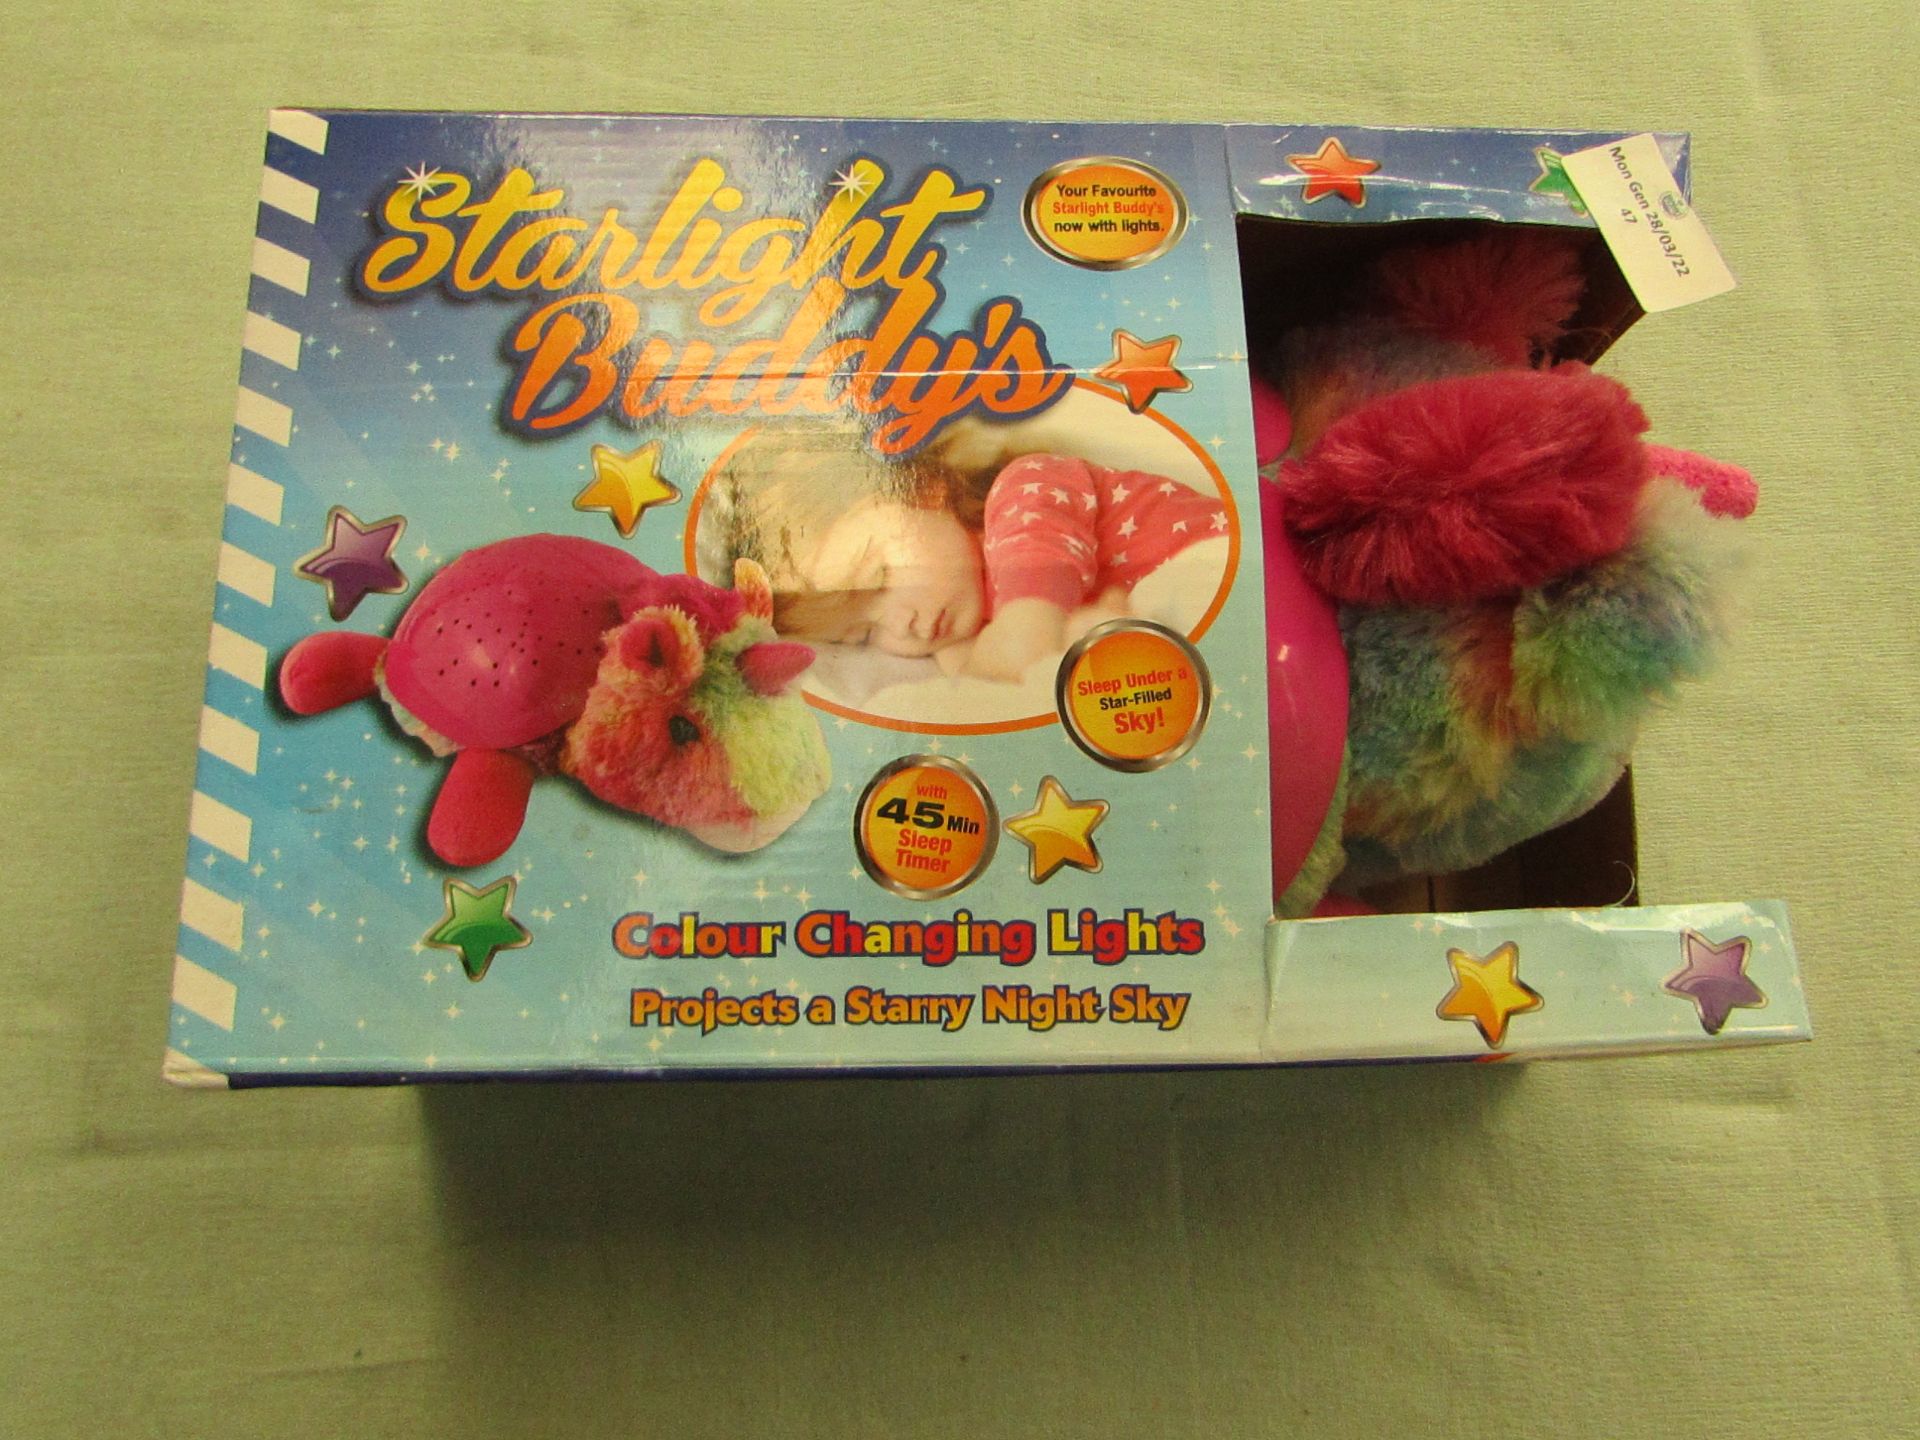 Falcon - Starlight Buddies ( Projects Starry Night Sky ) - Untested & Boxed.